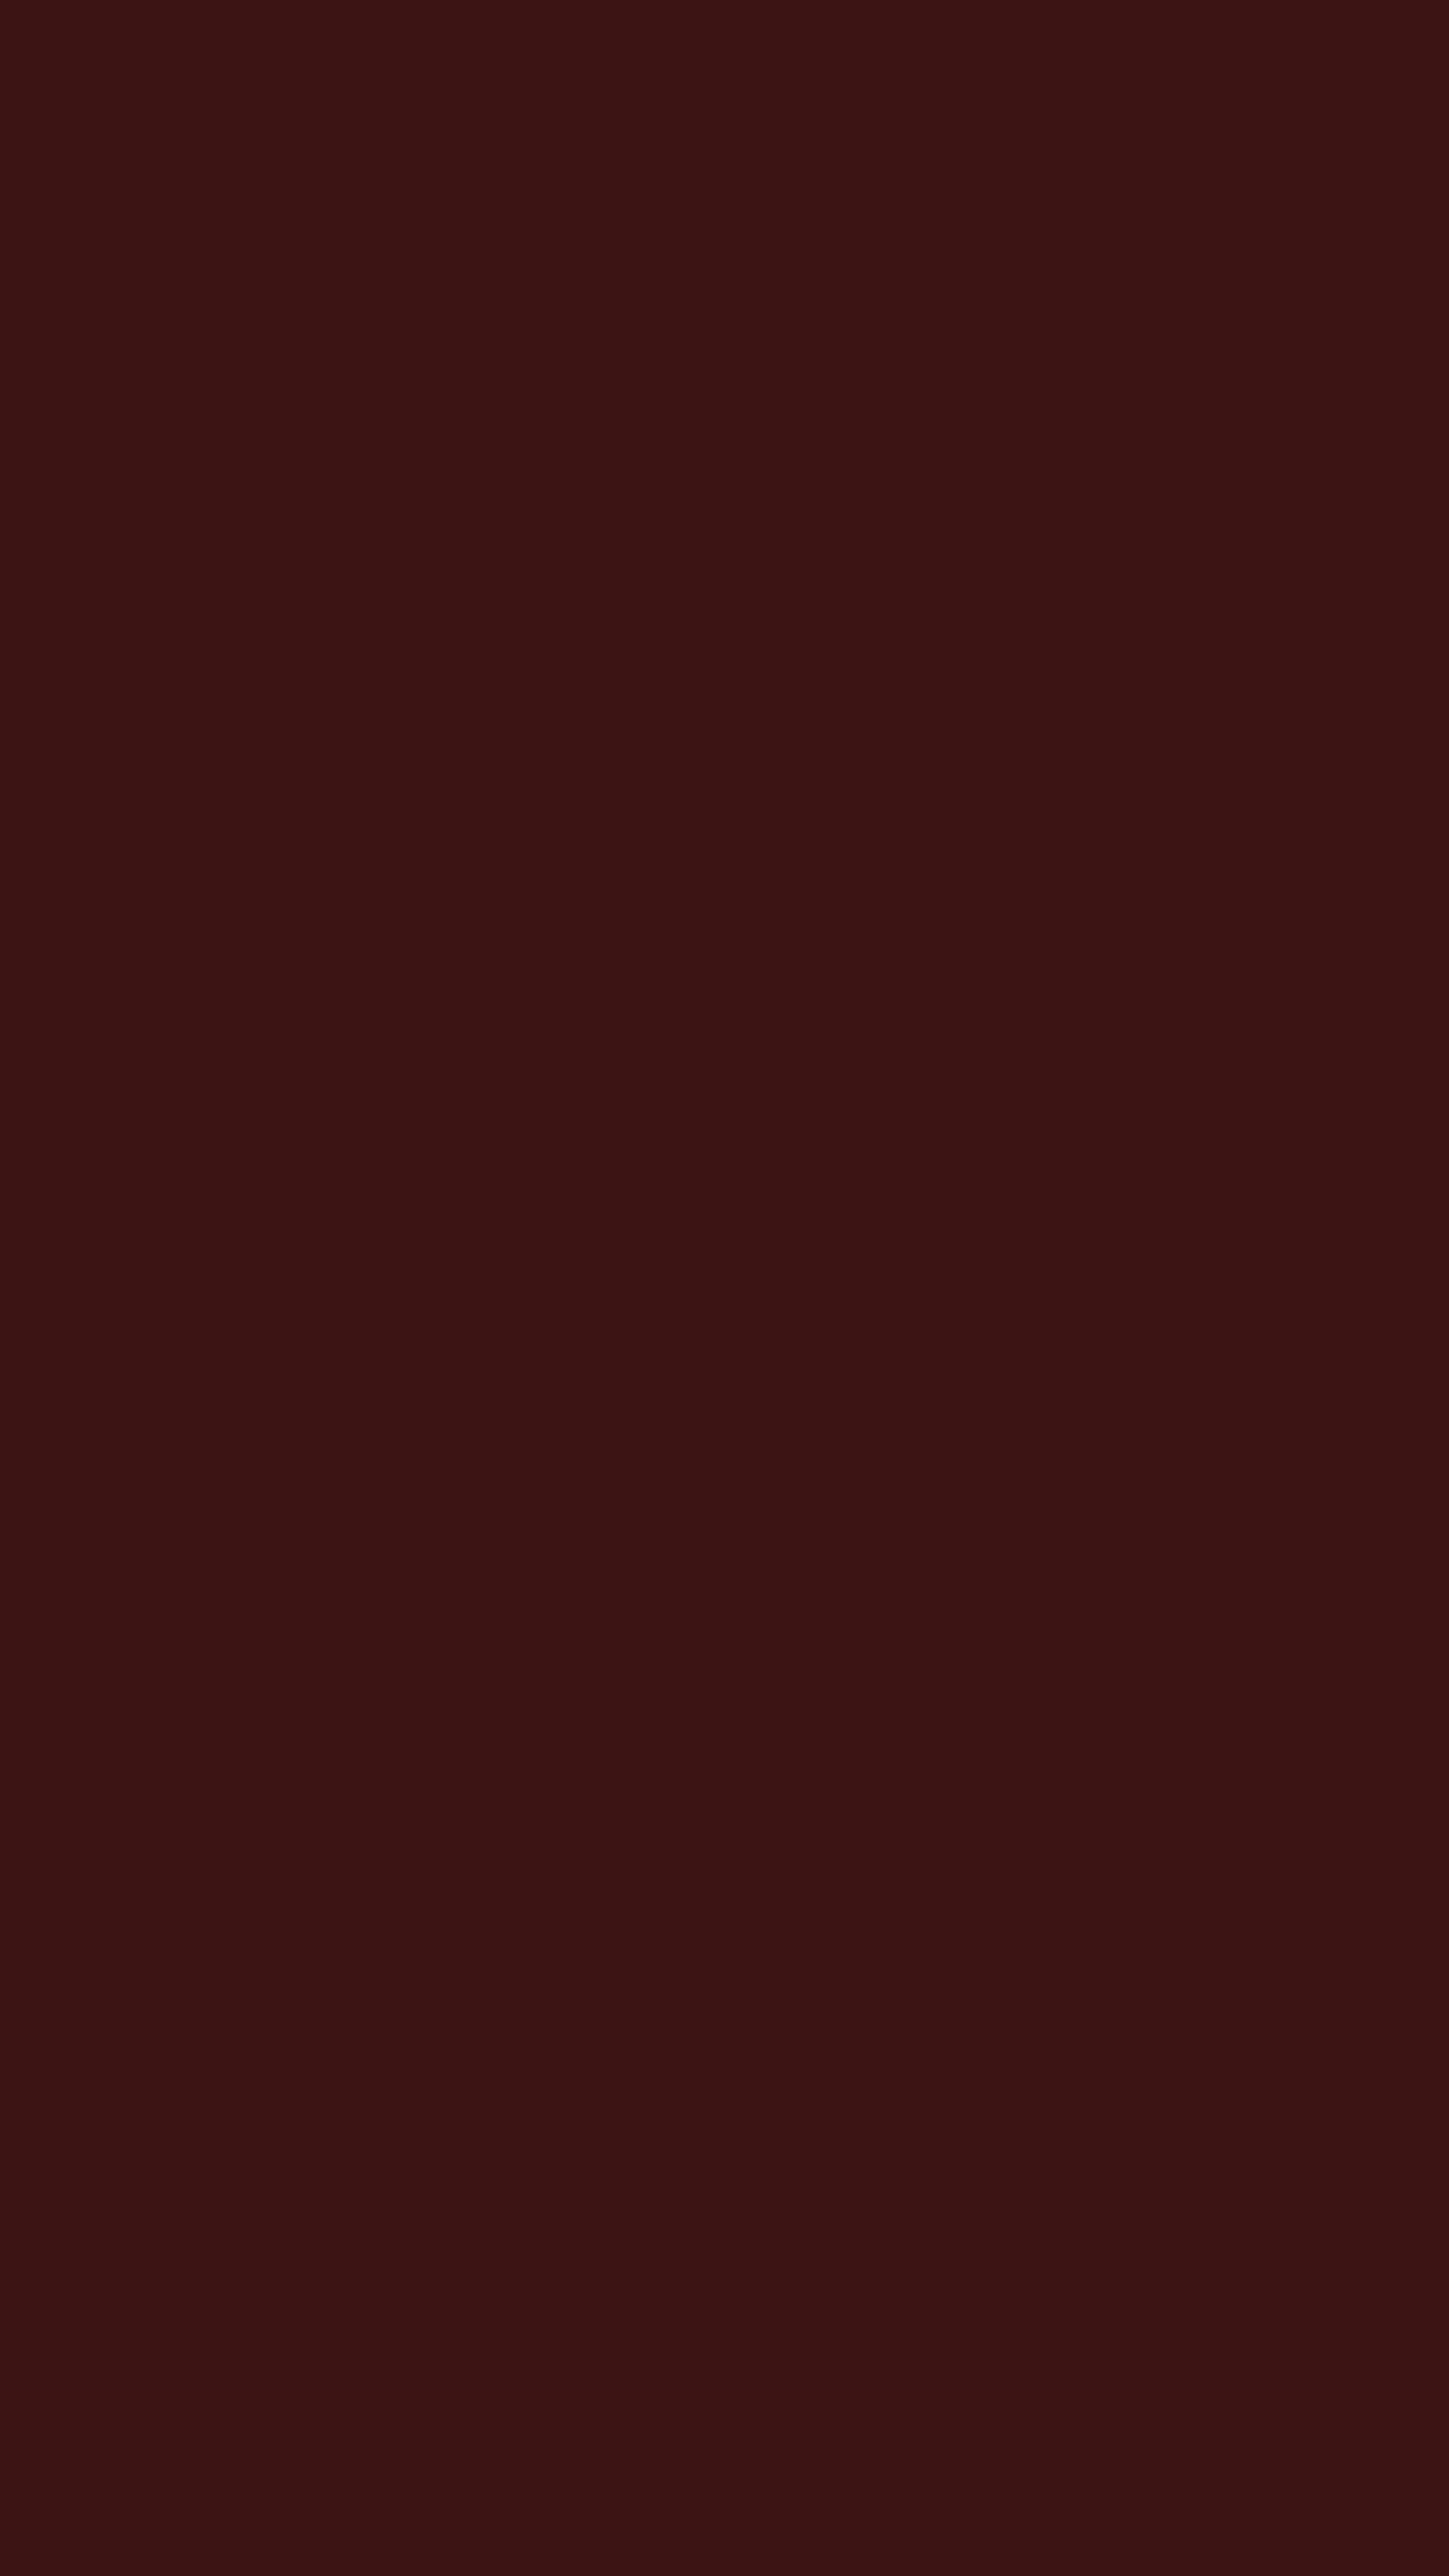 Dark Sienna Solid Color Background Wallpaper for Mobile Phone